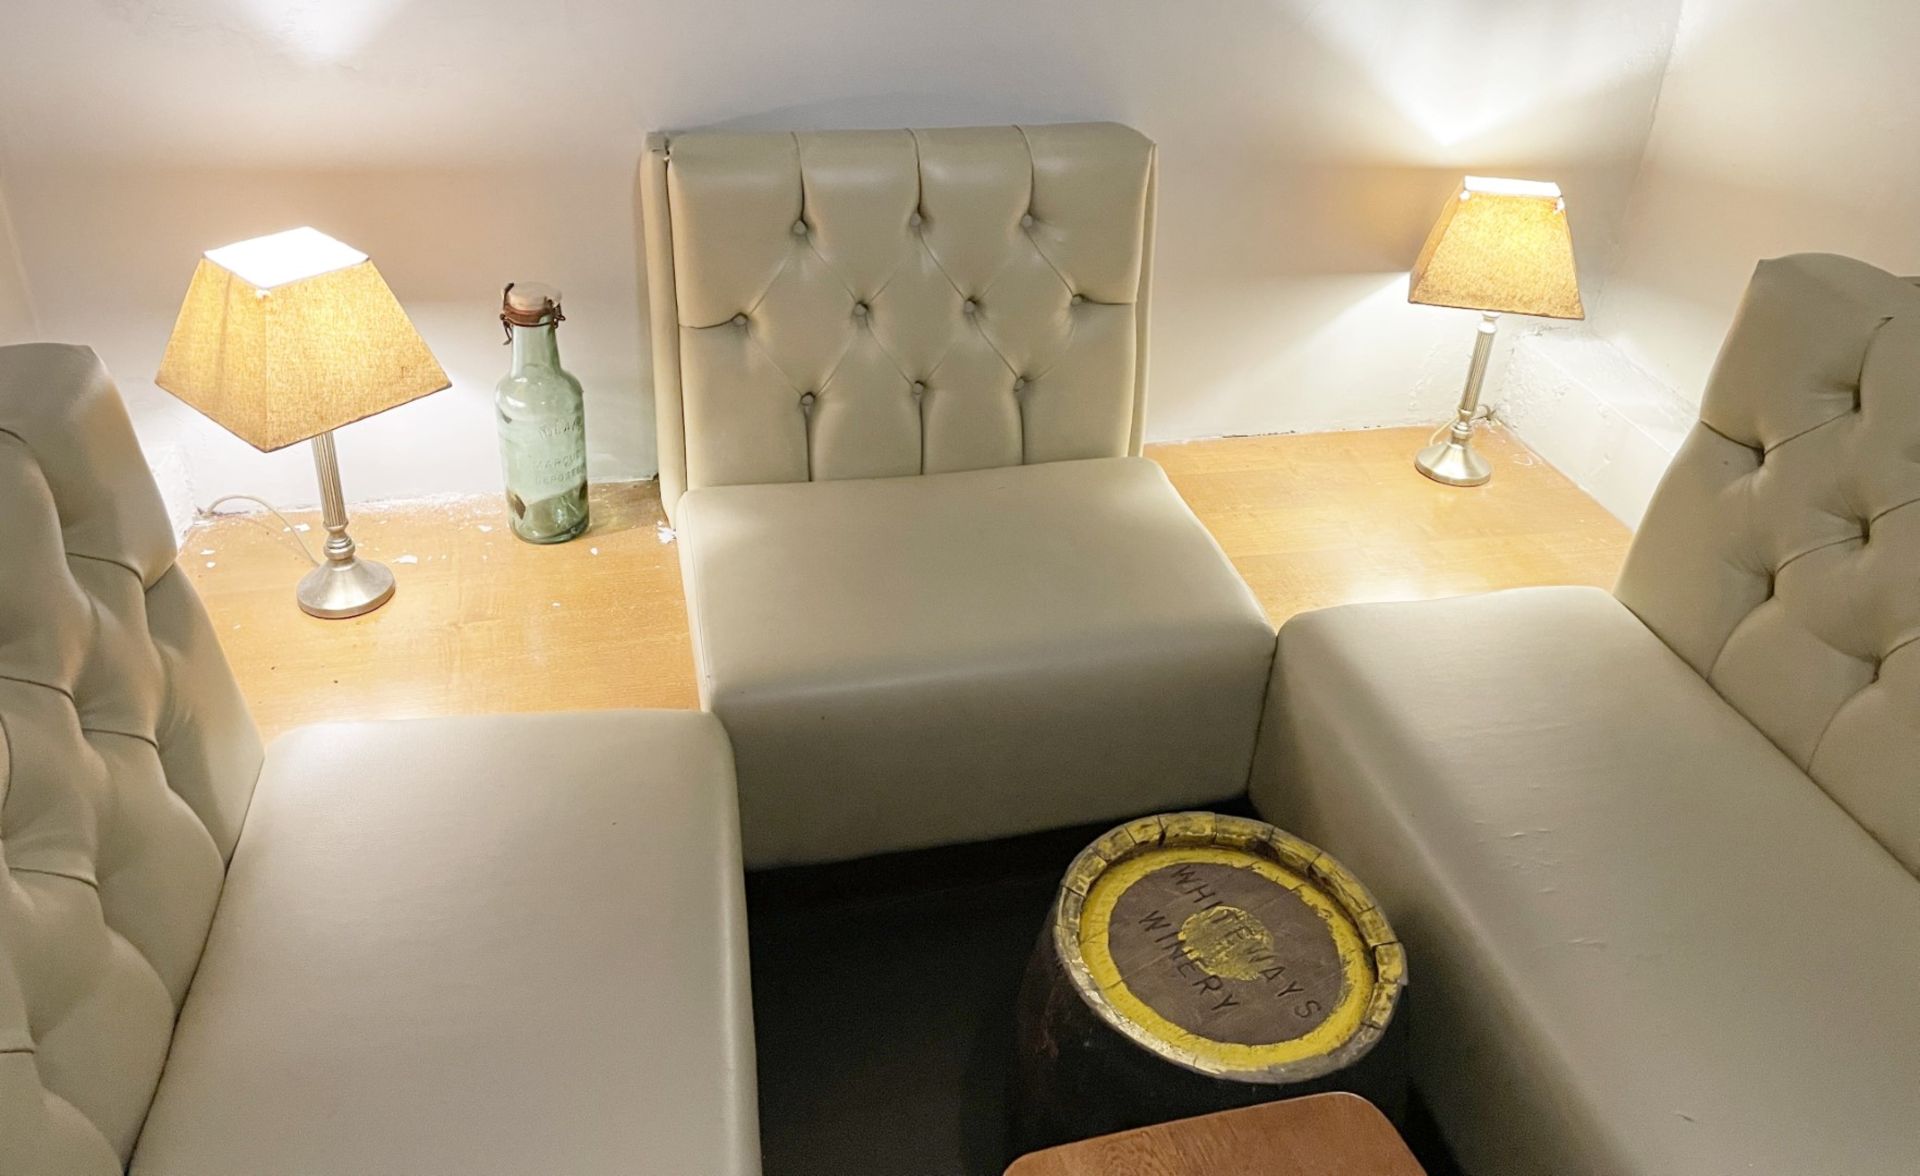 5 x Sections of Button Back Banquette Booth Seating Upholstered in a Cream Faux Leather - Image 6 of 6